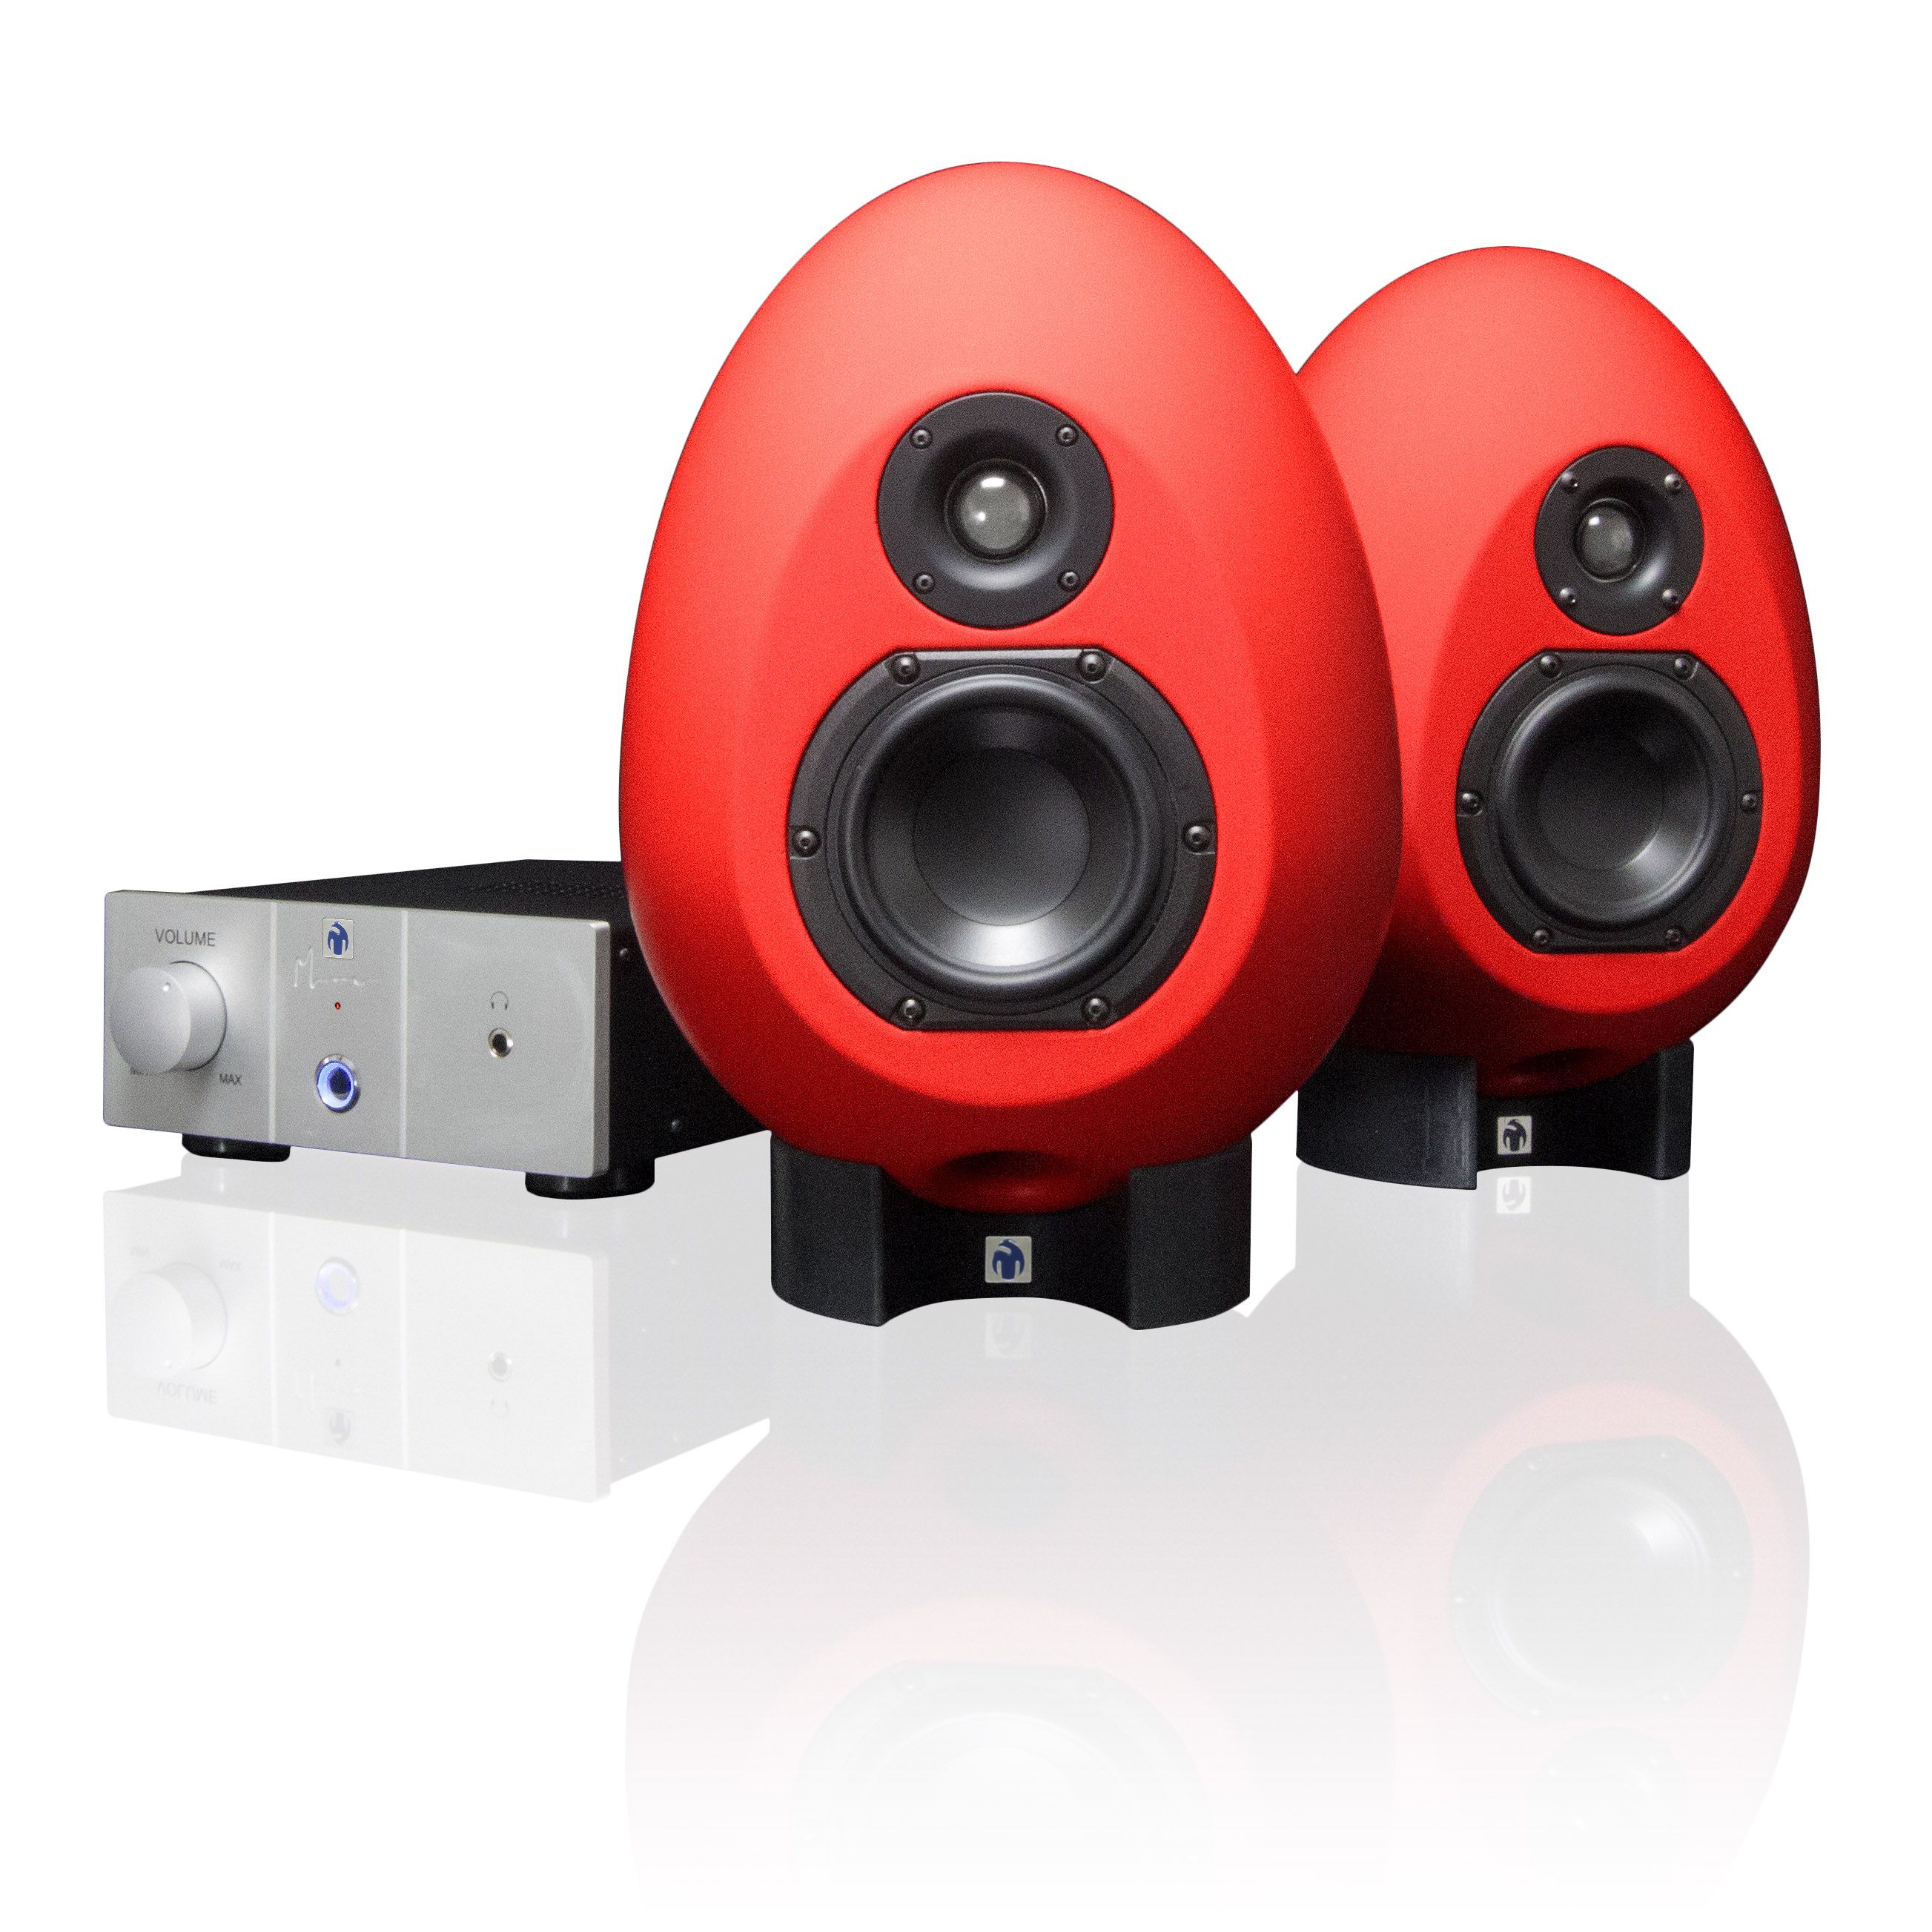 The SonicMunro Egg 100s with the included control and amplifer.